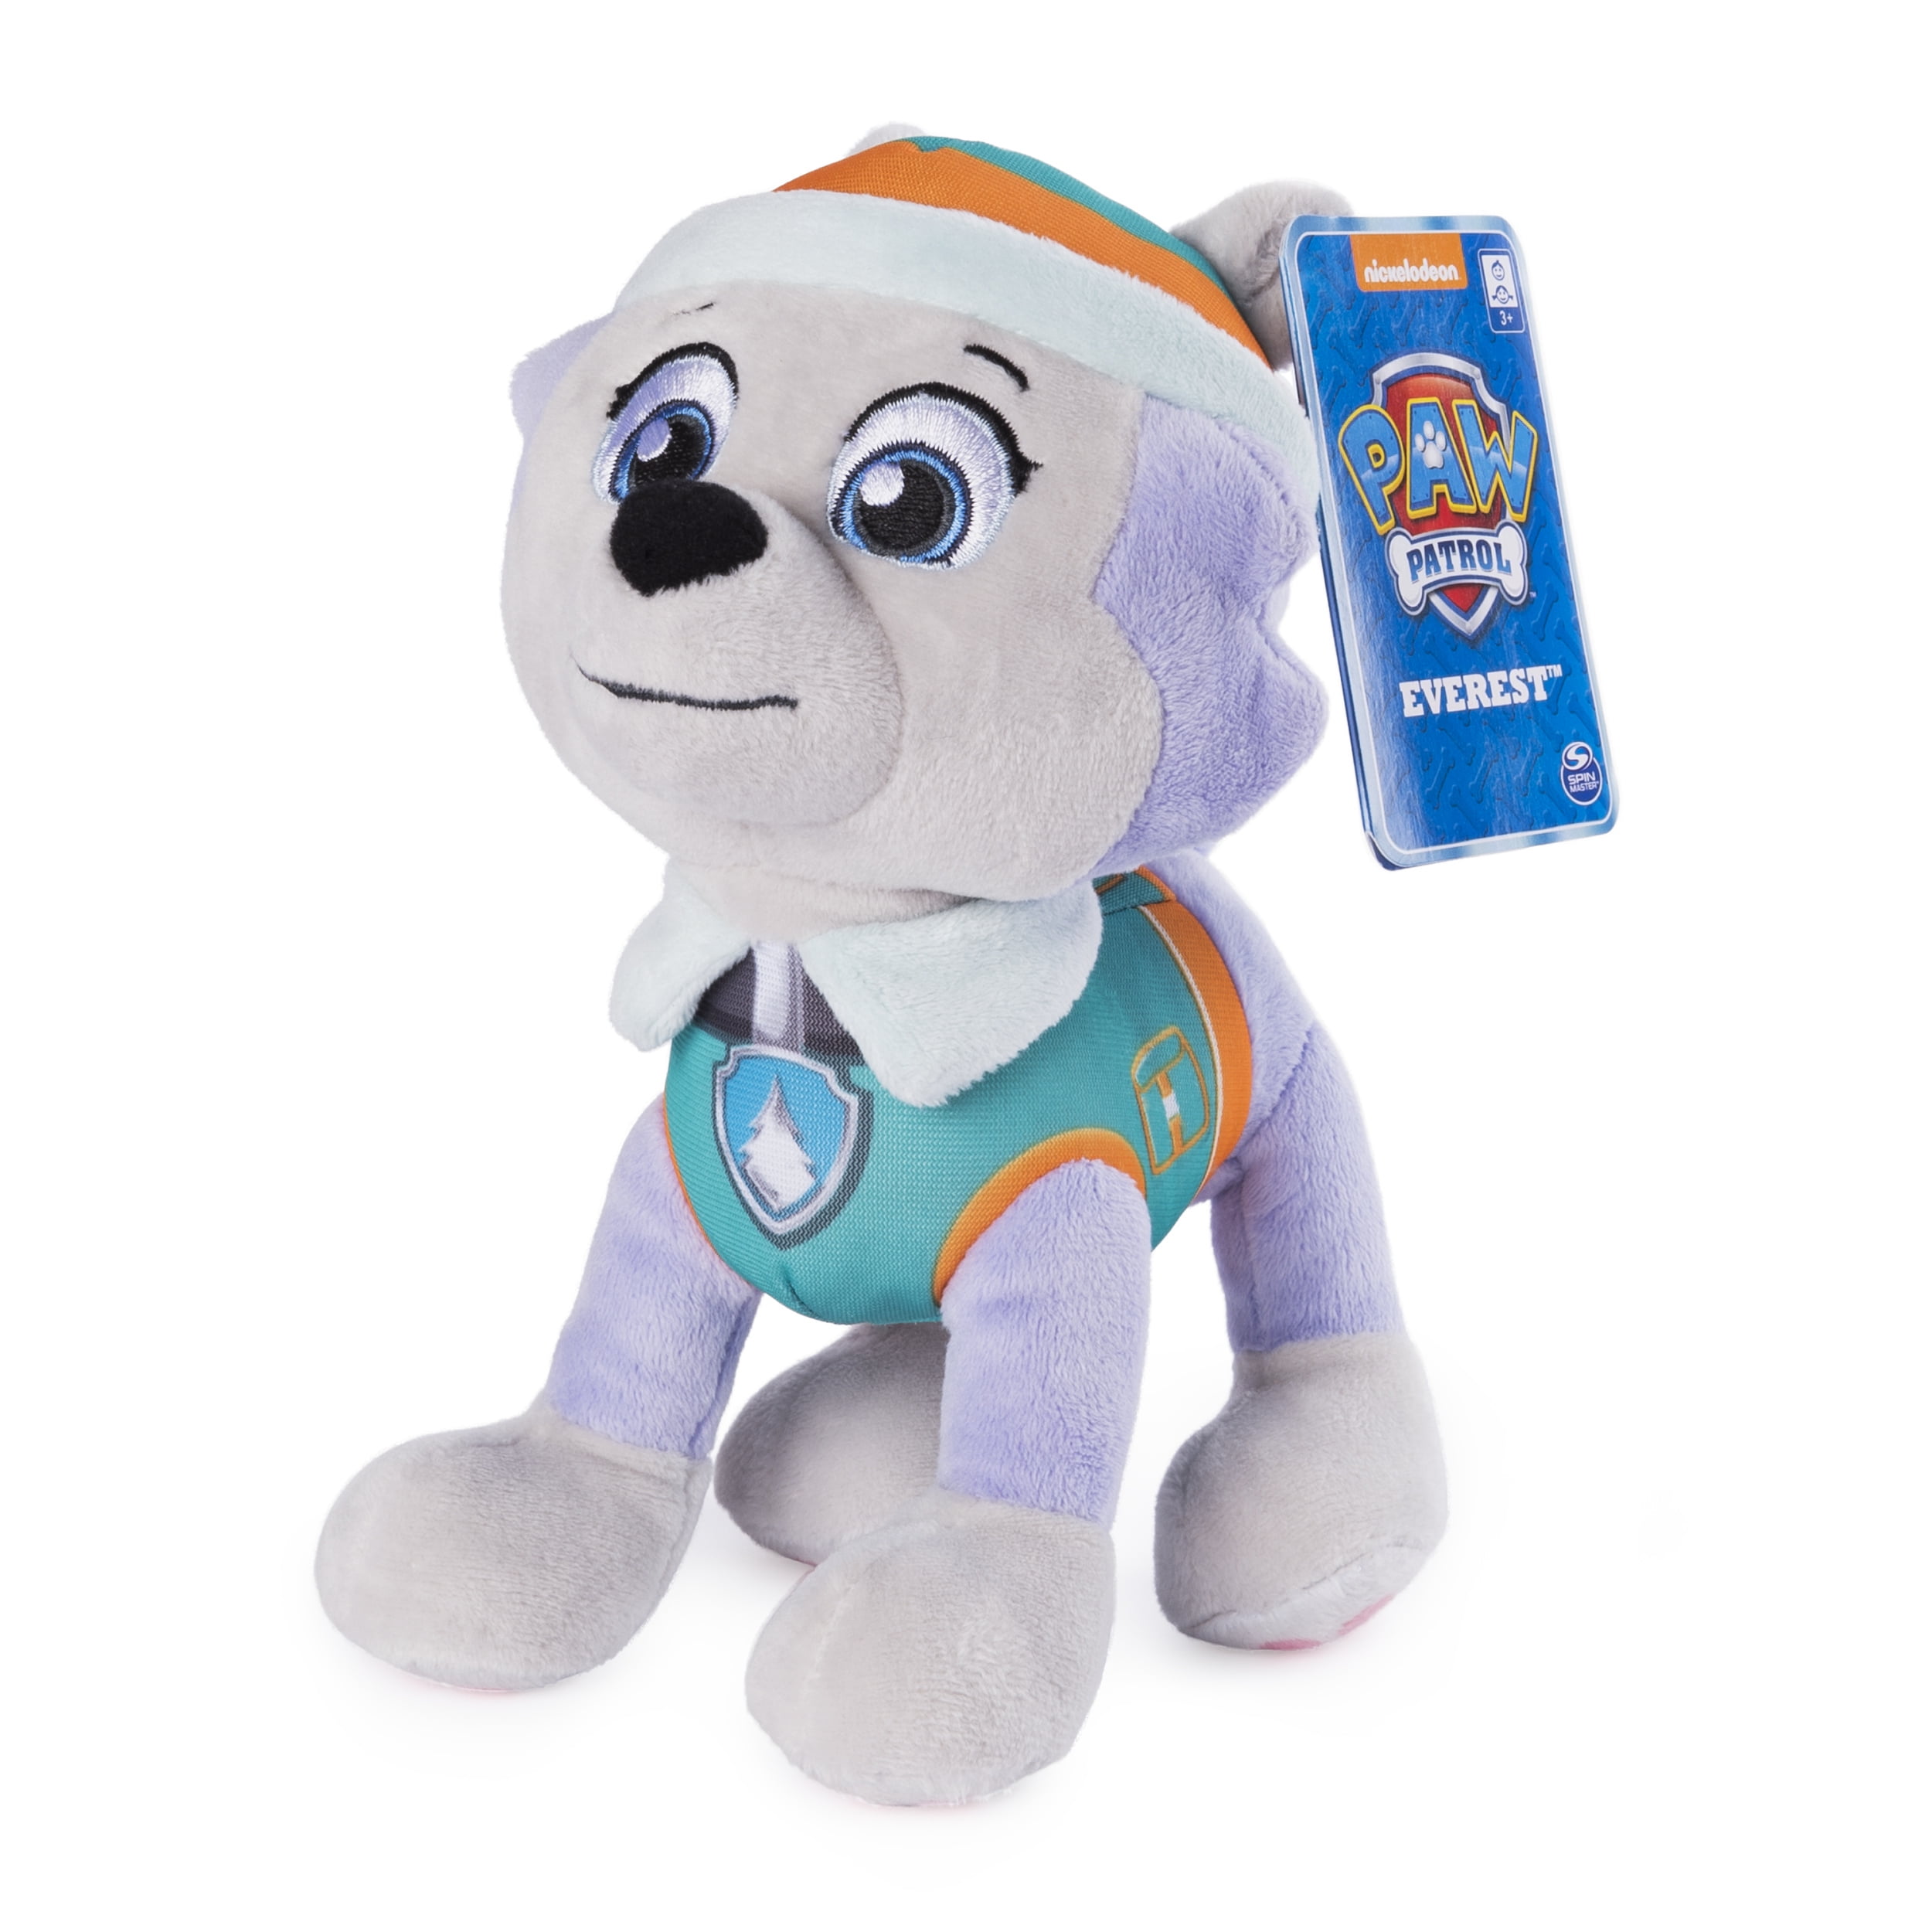 Patrol, 8 Inch Toy, Standing Plush with Stitched Detailing, for Ages and up - Walmart.com